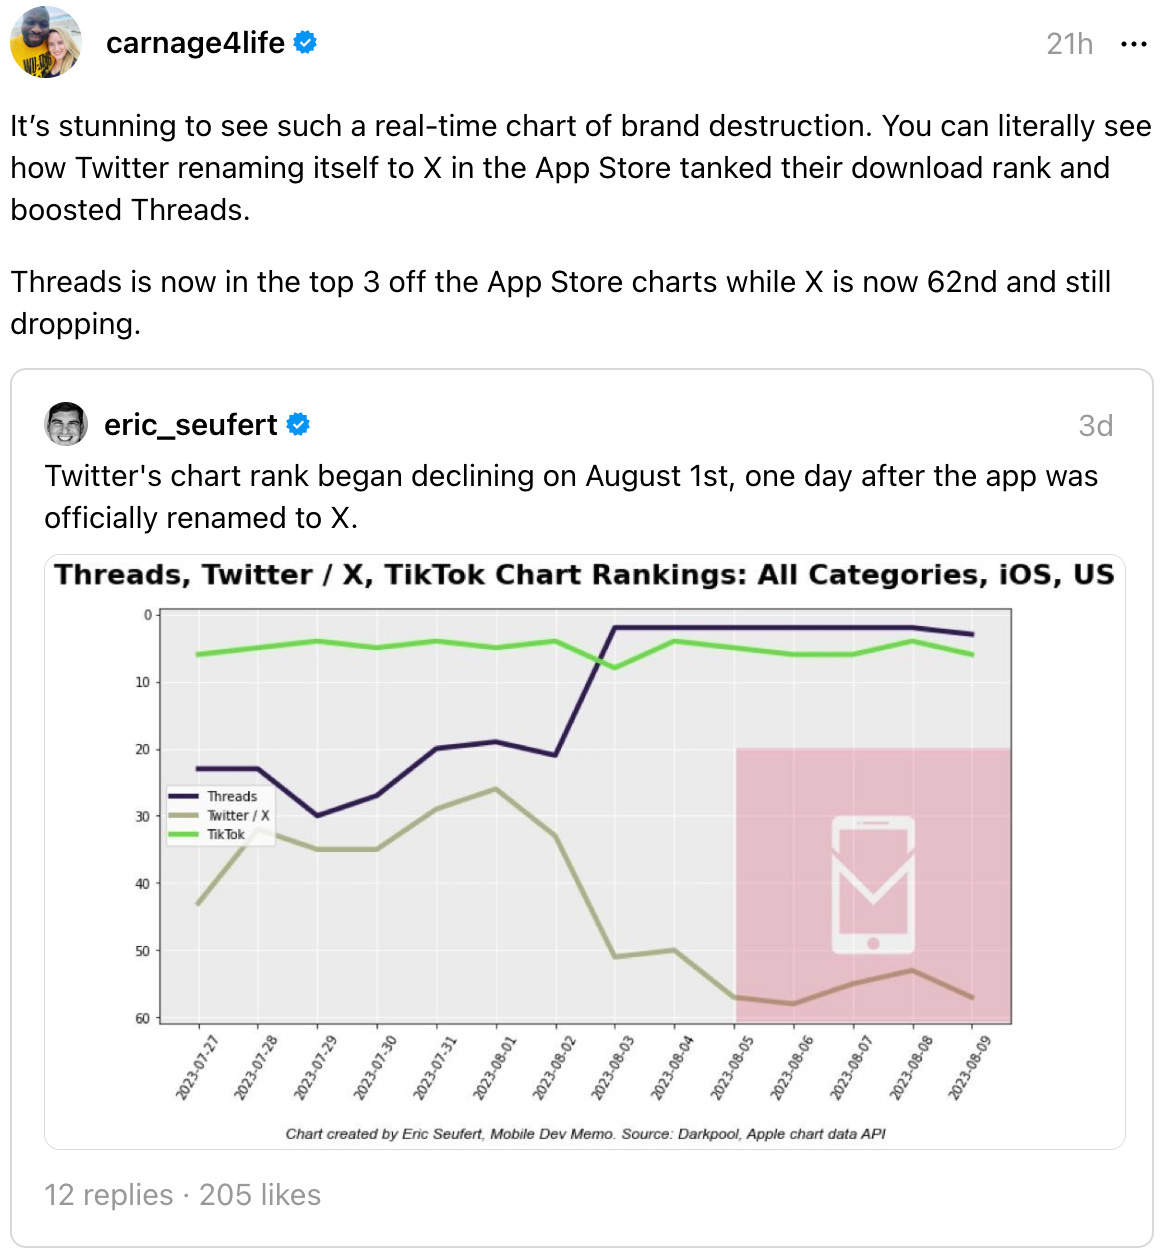 carnage4life's profile picture carnage4life 21h It’s stunning to see such a real-time chart of brand destruction. You can literally see how Twitter renaming itself to X in the App Store tanked their download rank and boosted Threads.  Threads is now in the top 3 off the App Store charts while X is now 62nd and still dropping.Twitter's chart rank began declining on August 1st, one day after the app was officially renamed to X.  12